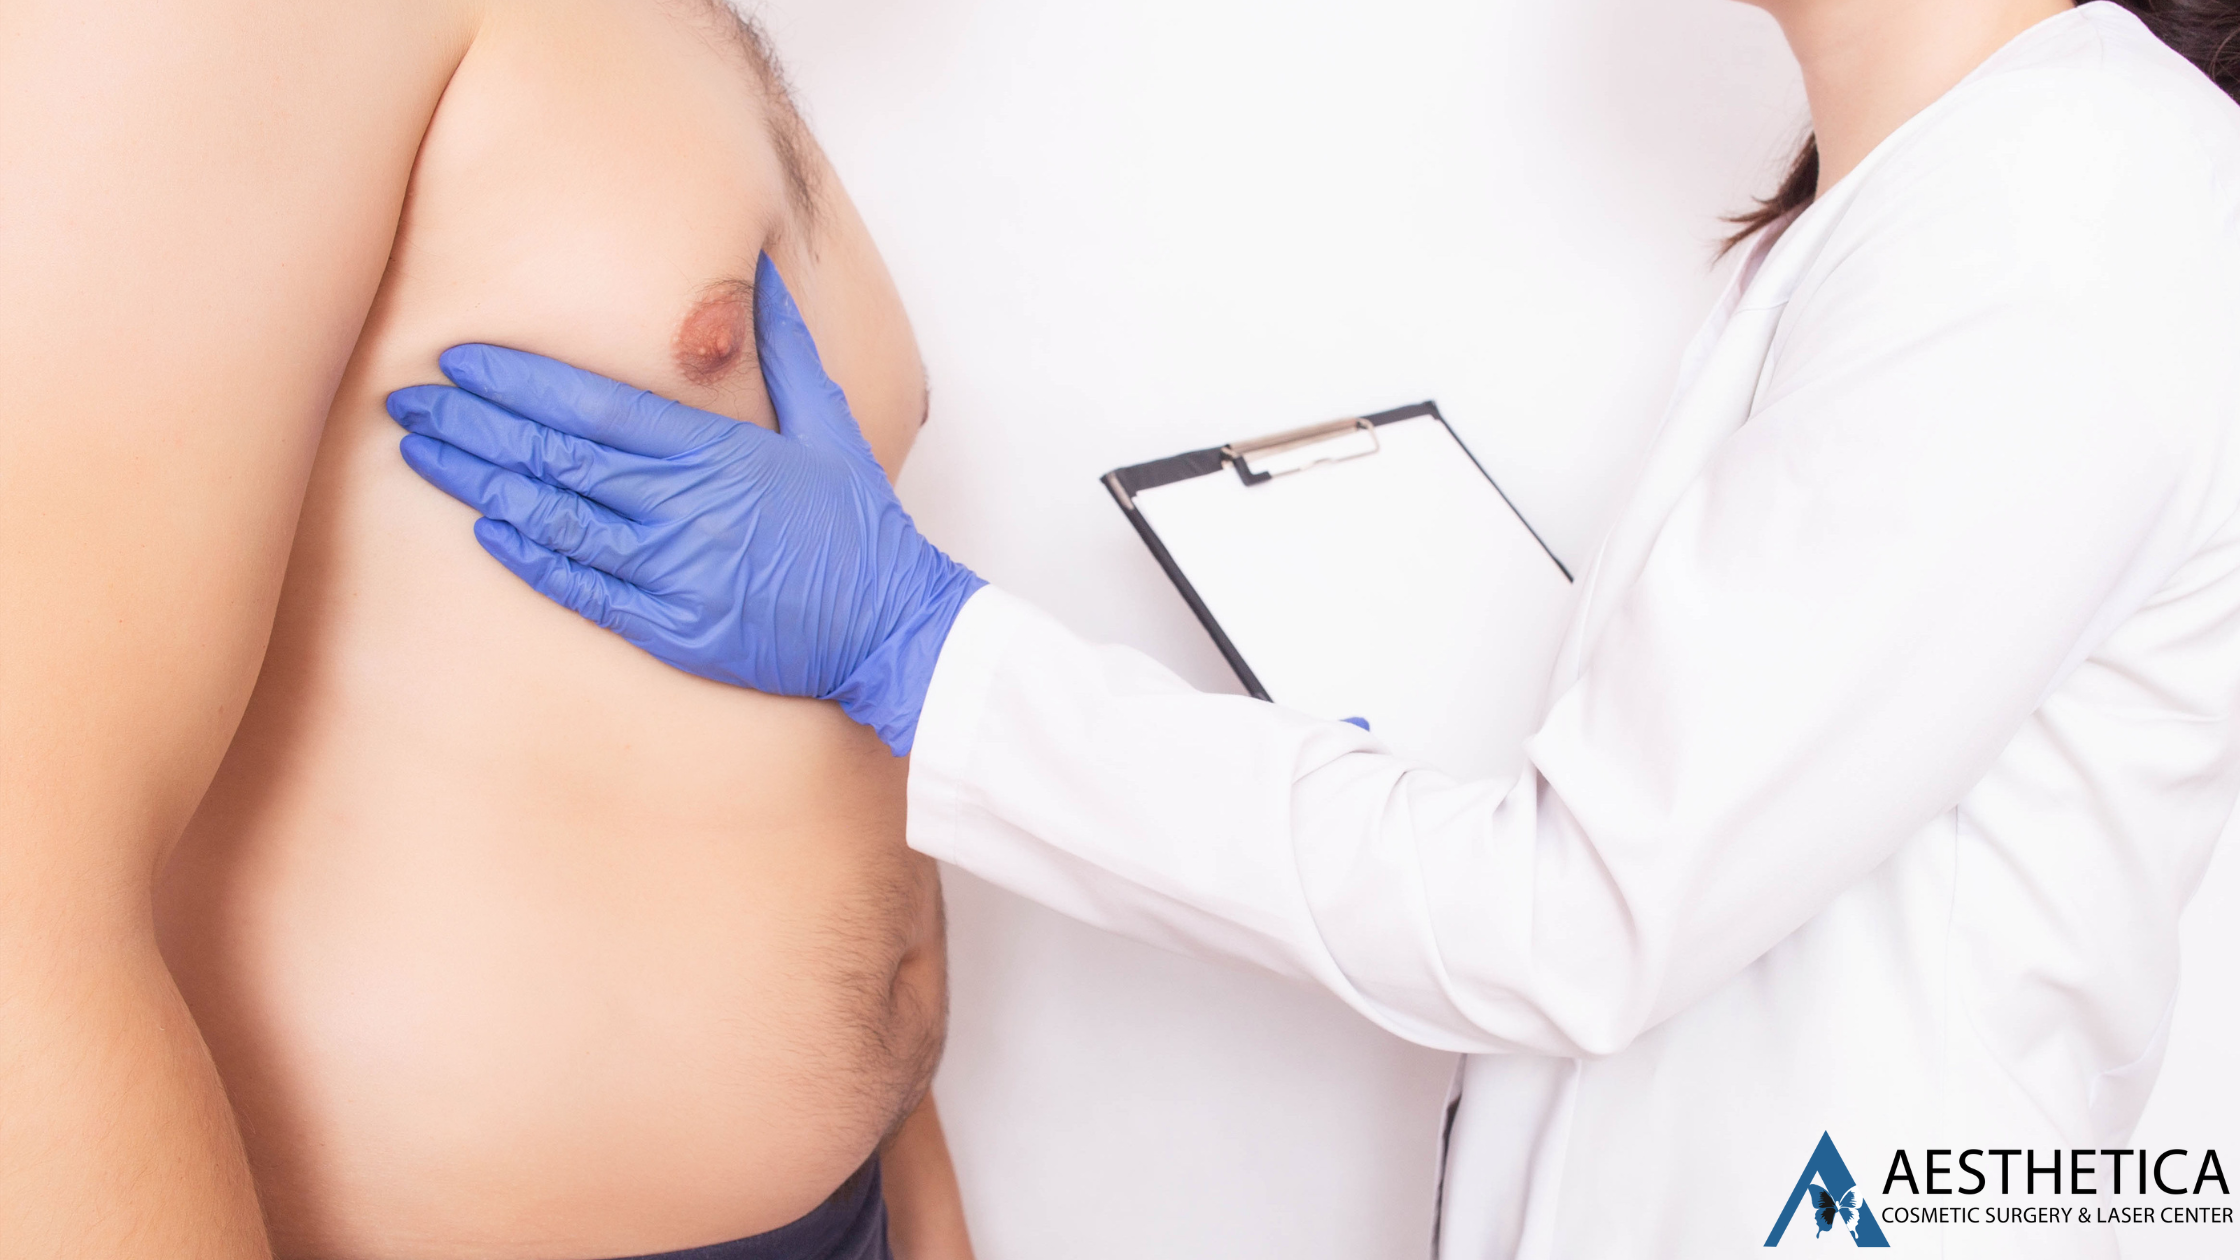 Exploring 3 Male Chest Reduction Options